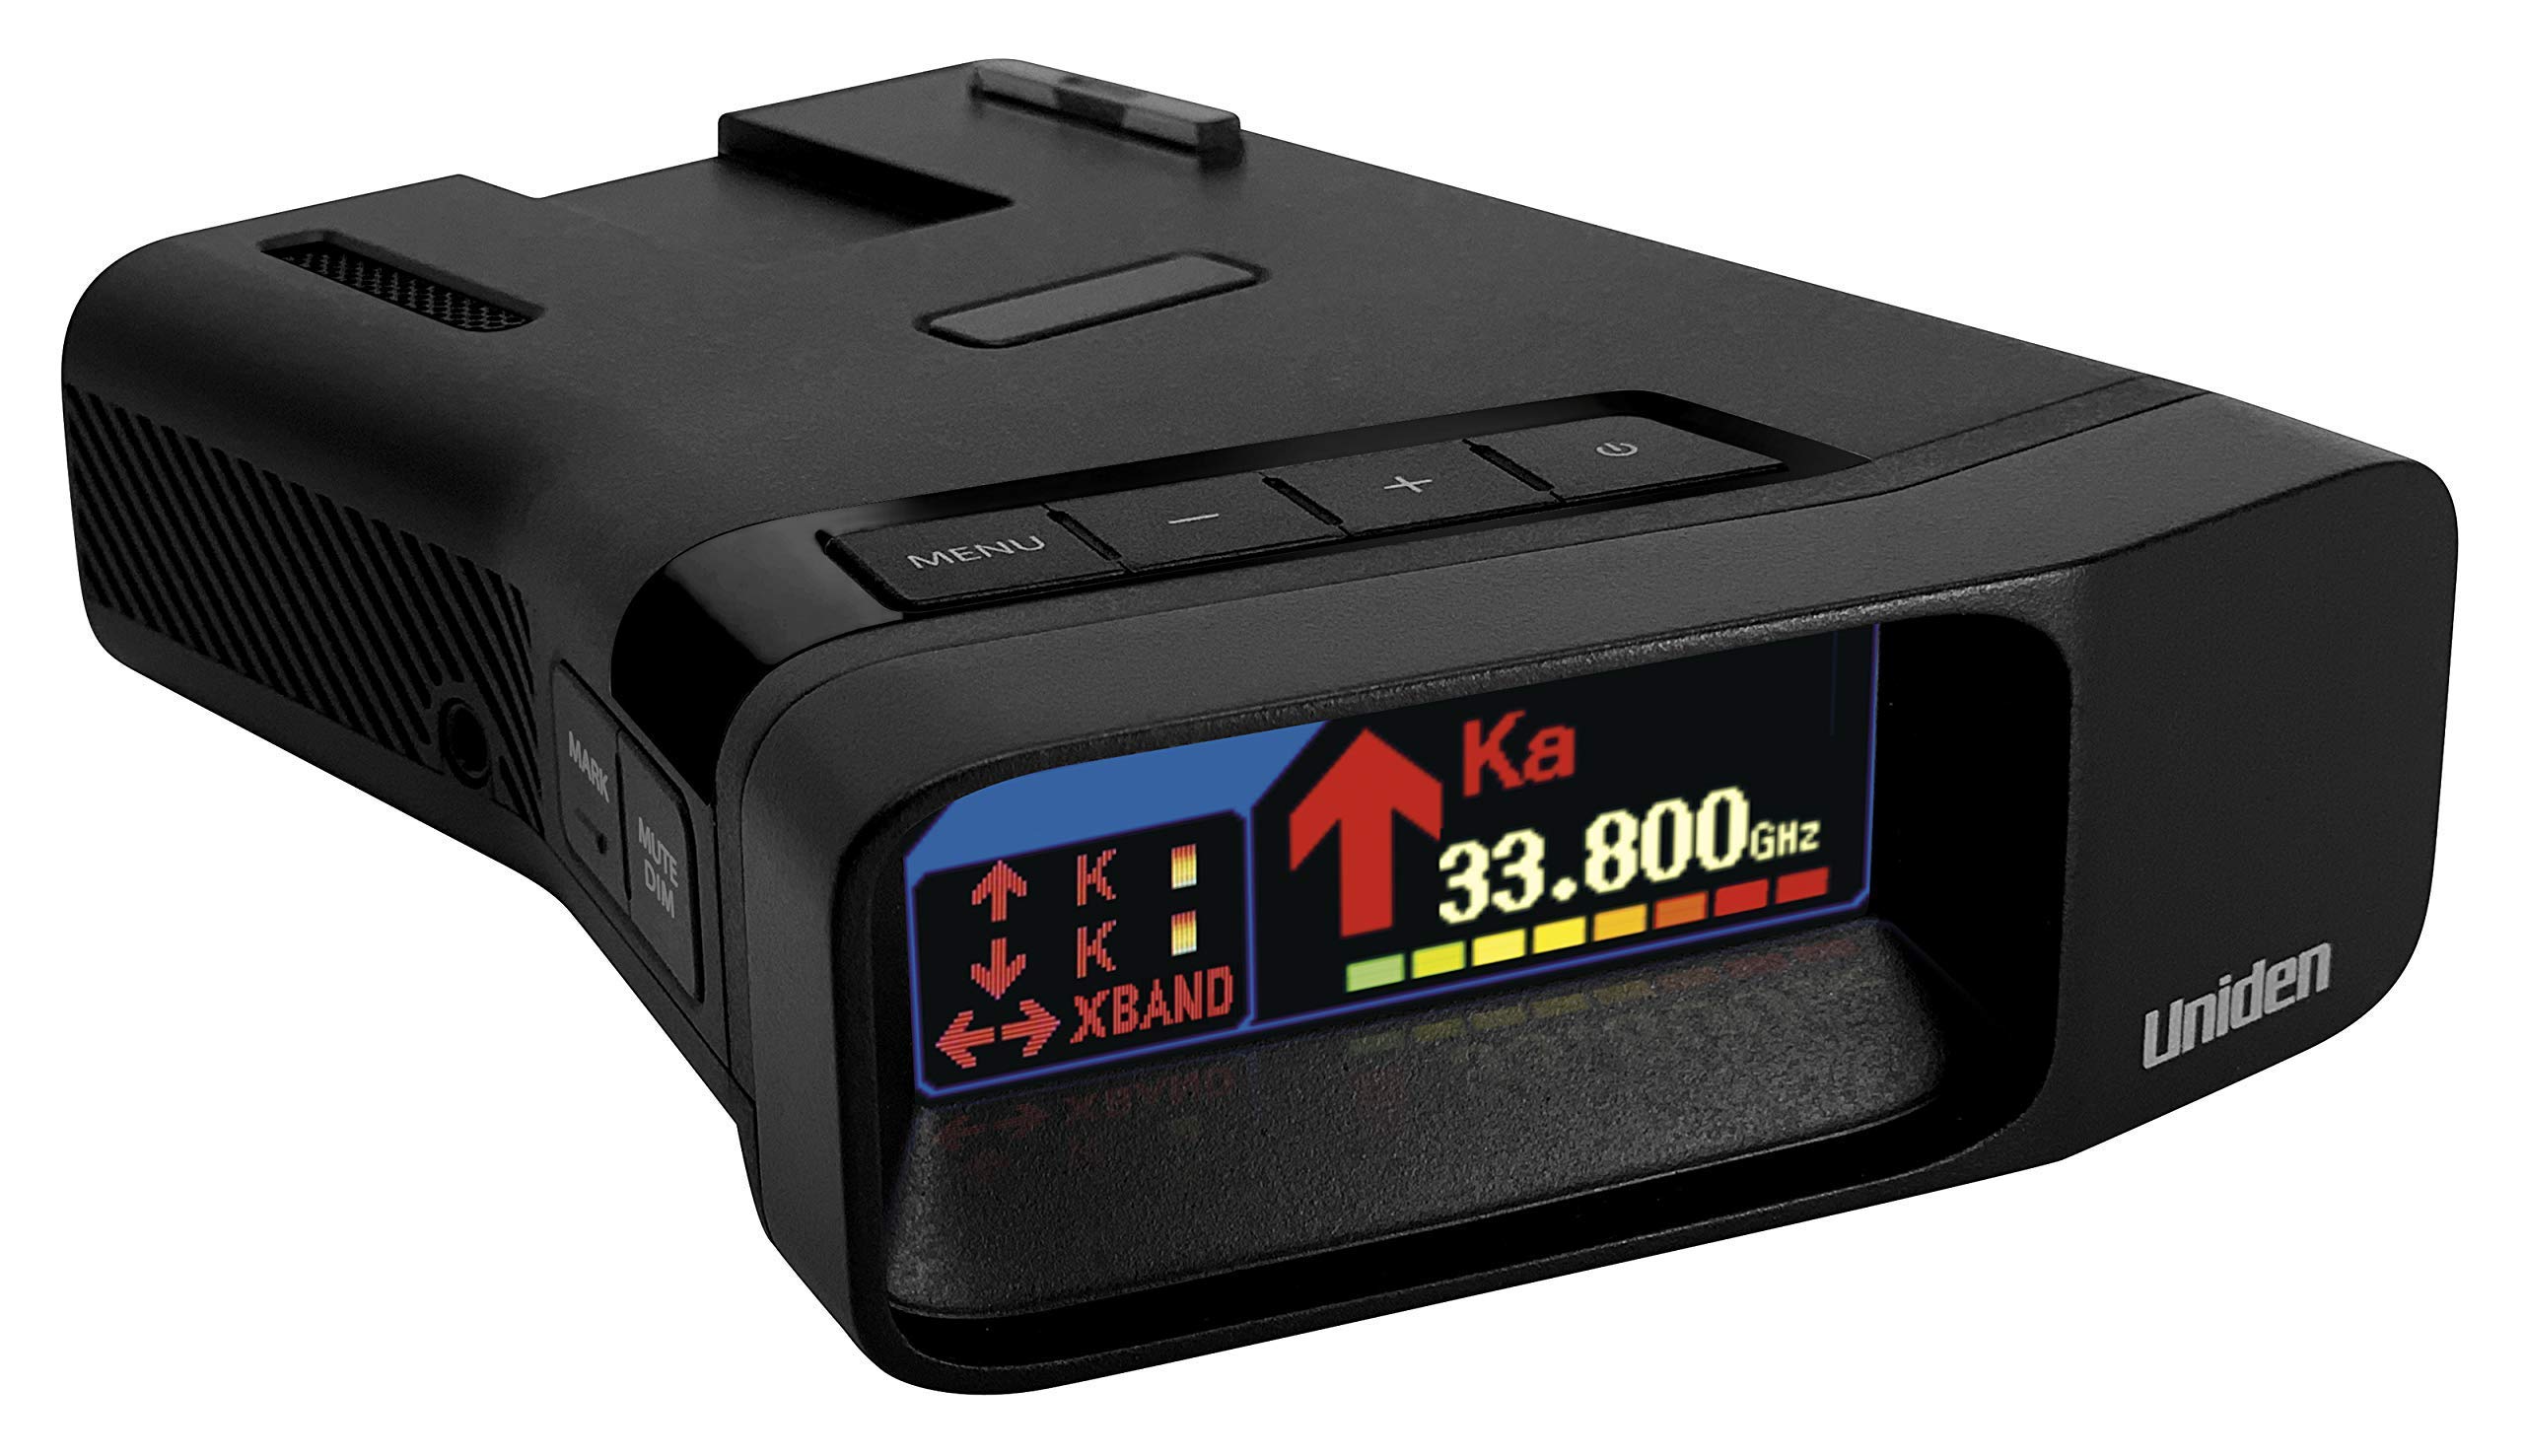 Amazon.com: Uniden R7 Xtreme Long Range Laser/Radar Detector, Built-in GPS with Auto Learn Mode, Dual-Antennas Front & Rear w/Directional Arrows, Voice Alerts, Red Light Camera, Speed Camera Alert, (Renewed) : Electronics